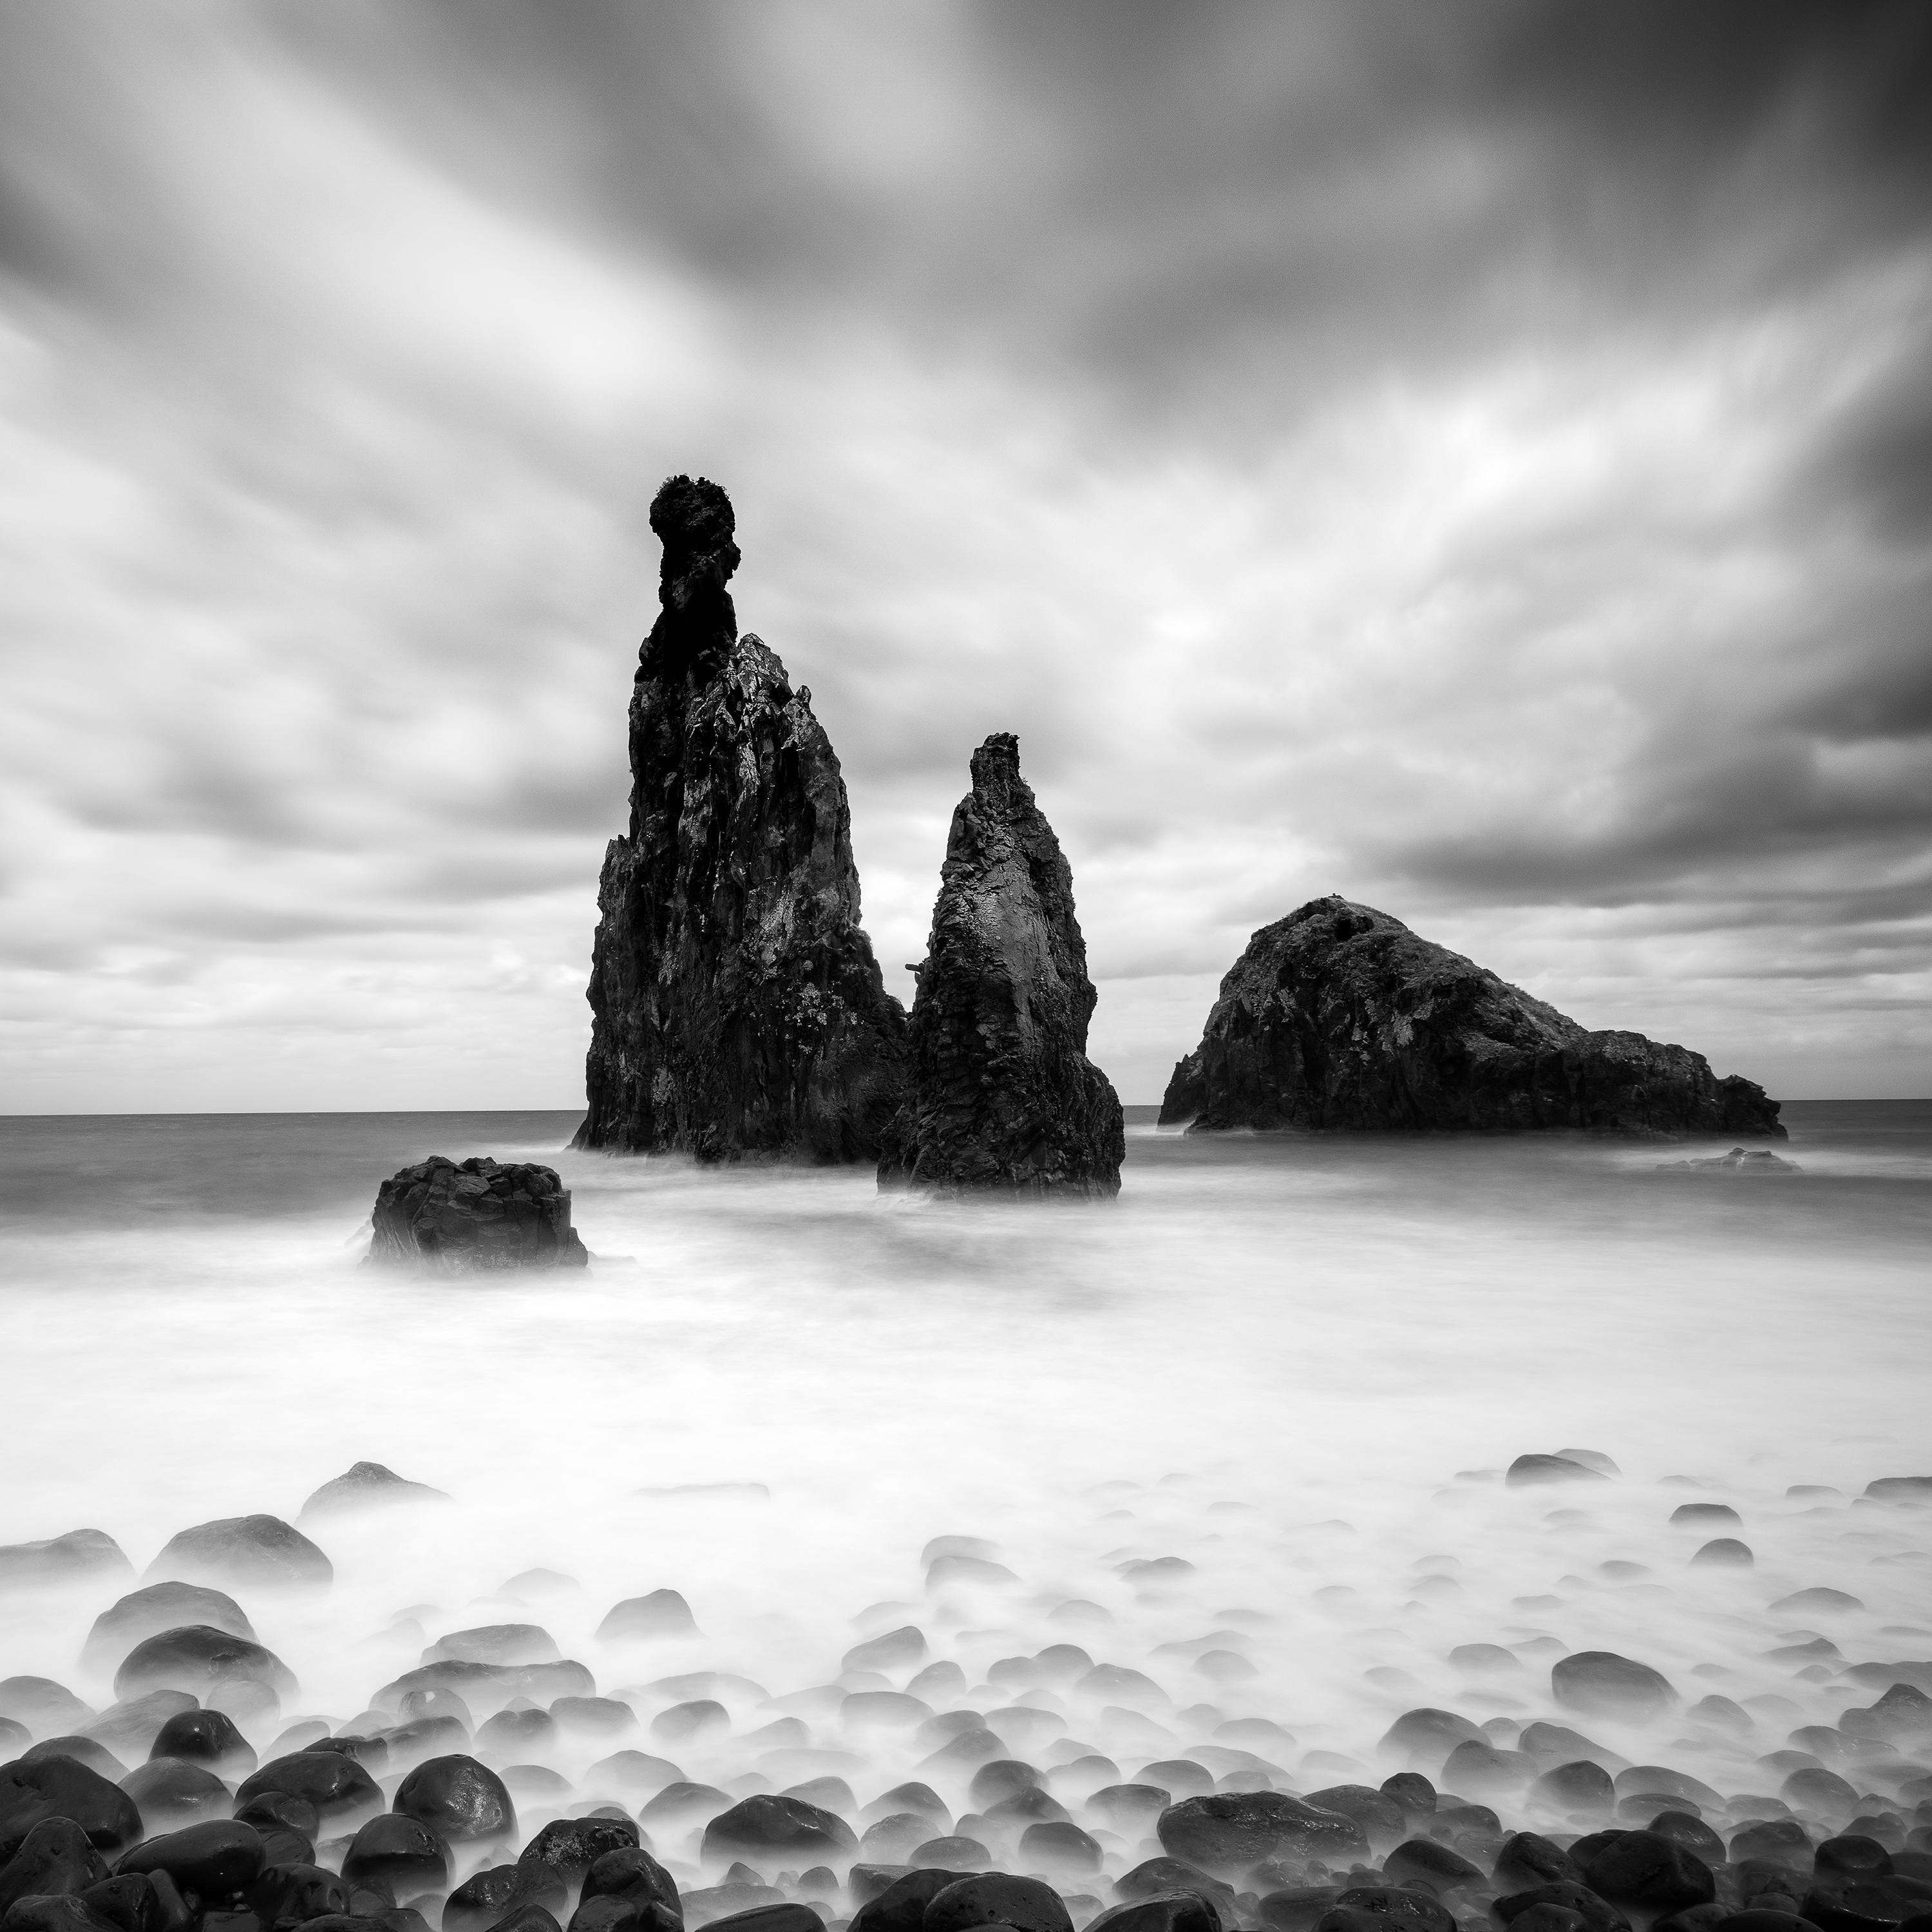 Black and White Fine Art Photography - Ilheus da Ribeira da Janela is an epic coastal spot with some truly remarkable rock formations, Madeira, Portugal. Archival pigment ink print, edition of 8. Signed, titled, dated and numbered by artist.